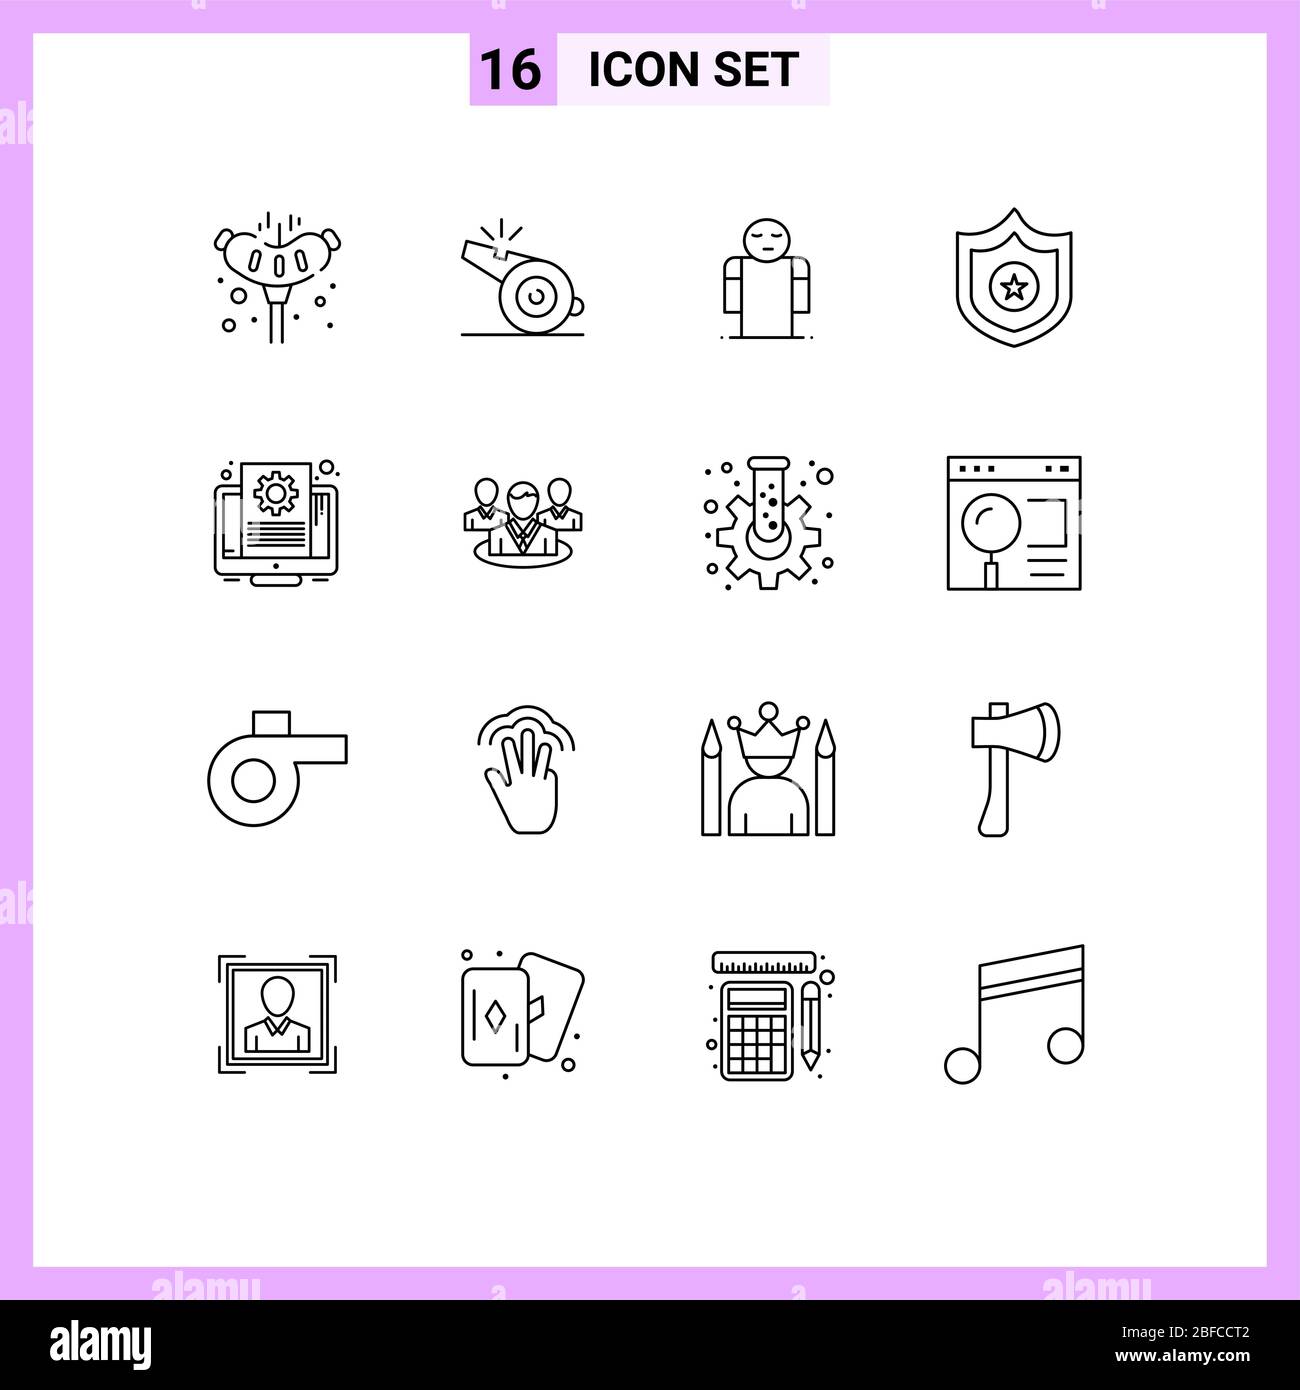 User Interface Pack of 16 Basic Outlines of setting, document, arms, shield, police Editable Vector Design Elements Stock Vector